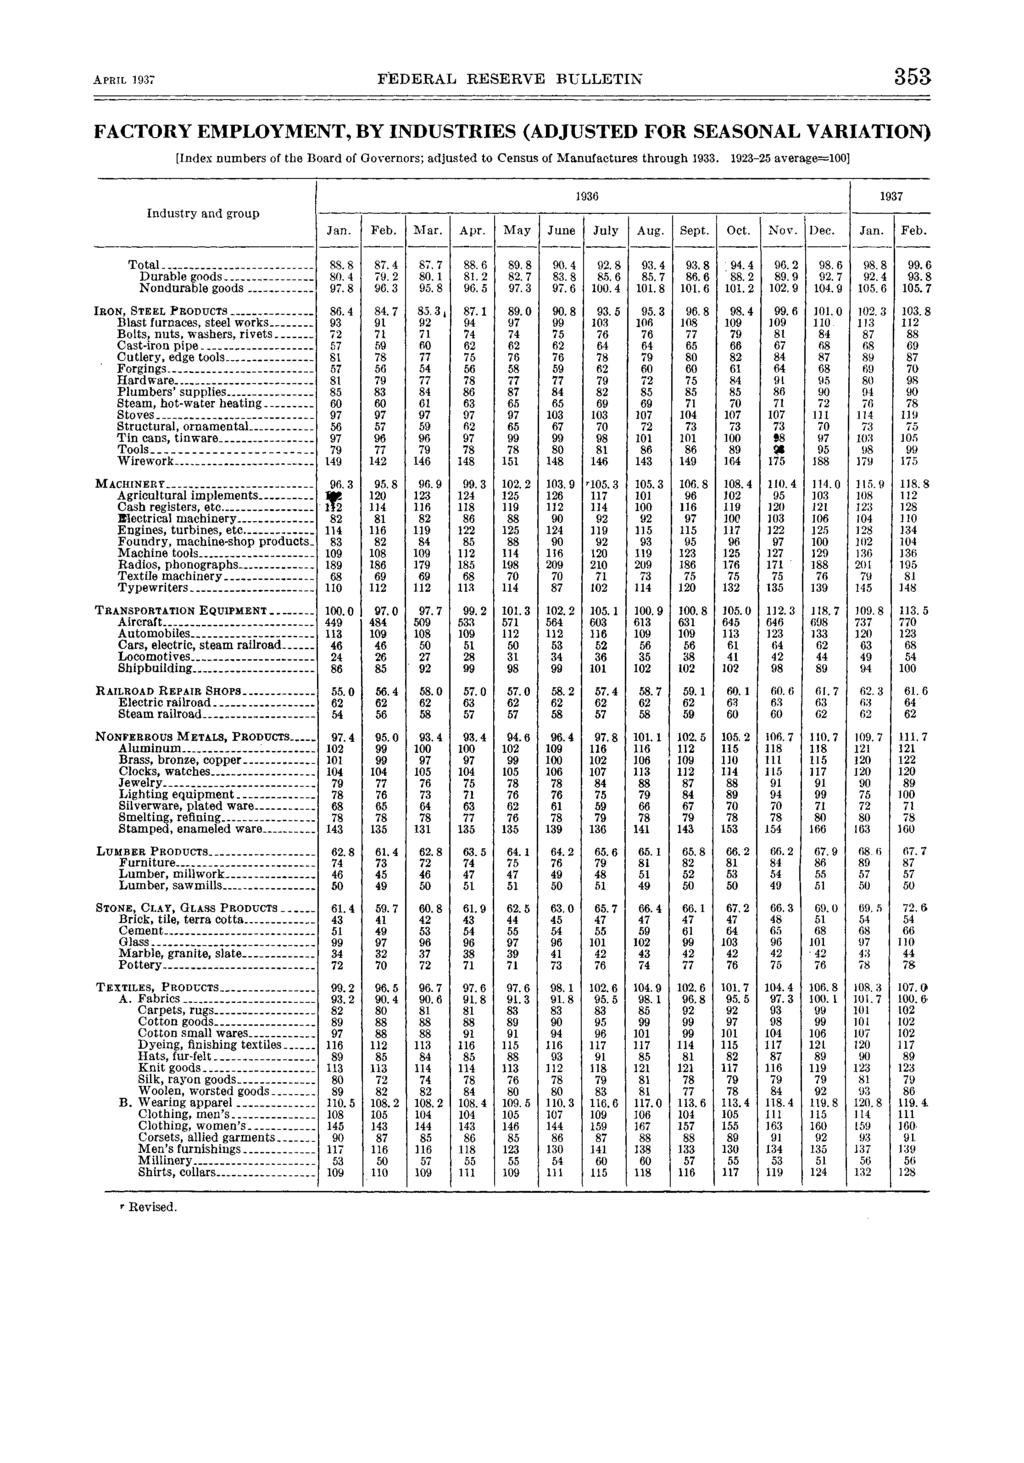 APRIL FEDERAL RESERVE BULLETIN FACTORY EMPLOYMENT, BY INDUSTRIES (ADJUSTED FOR SEASONAL VARIATION) [Index numbers of the Board of Governors; adjusted to Census of Manufactures through 9.